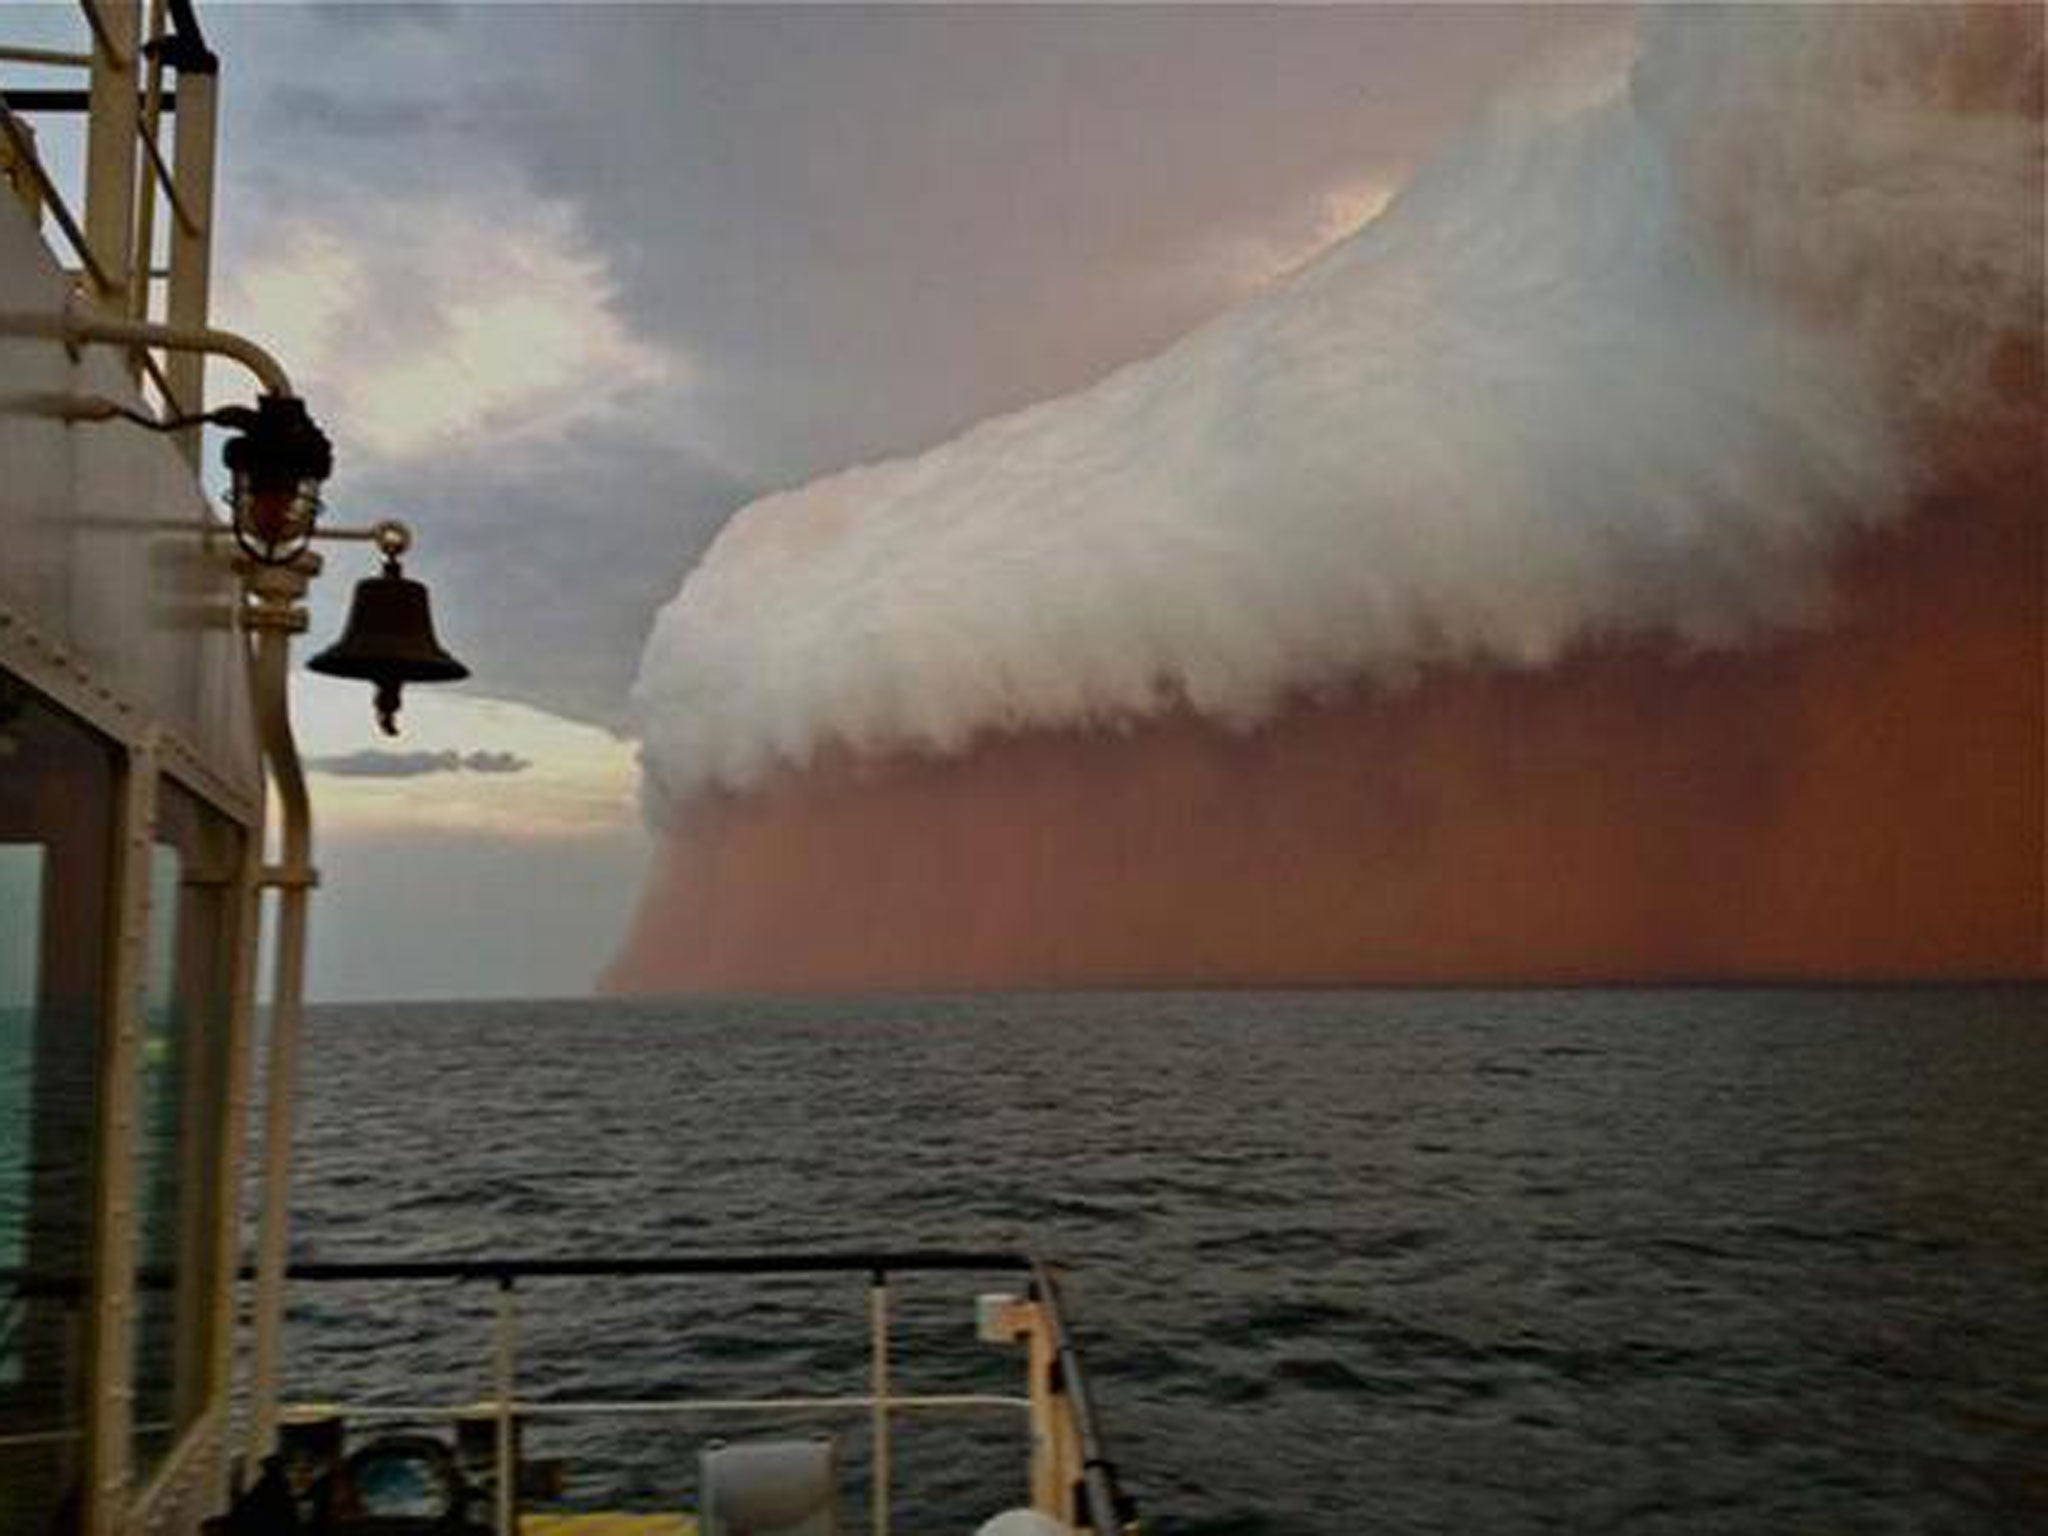 A towering red dust storm in Perth, Australia